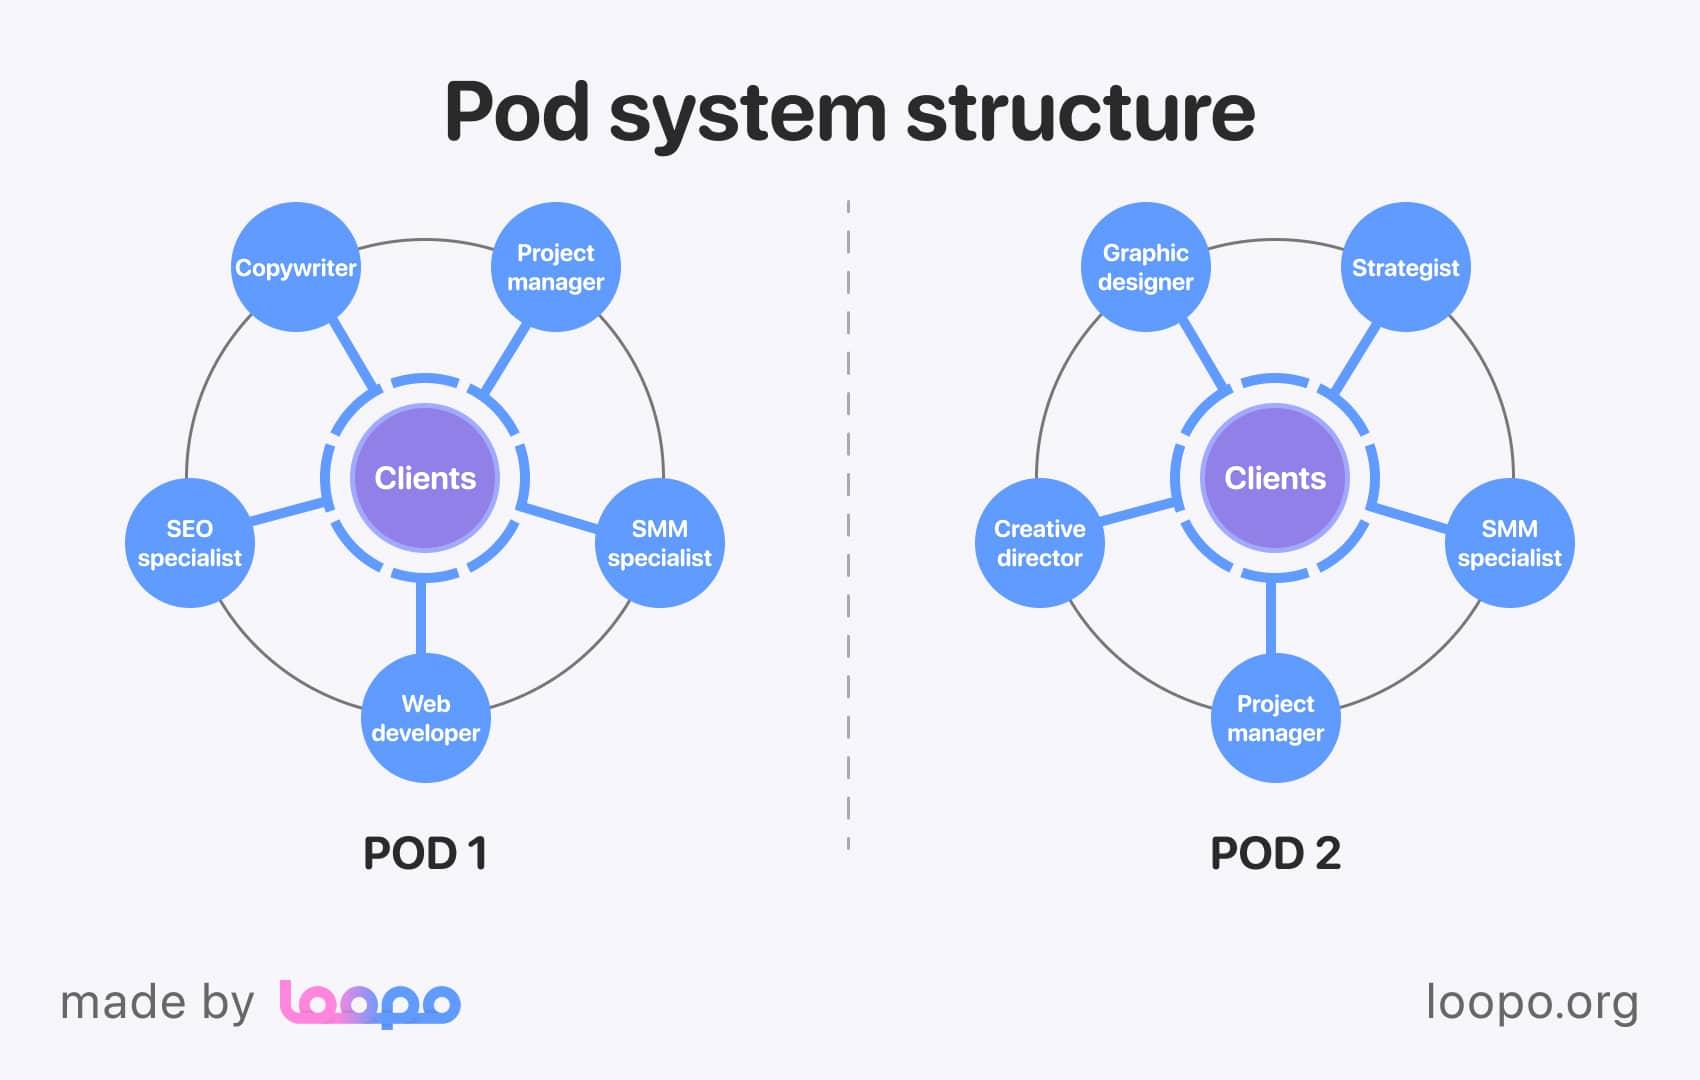 Pod system structure overview